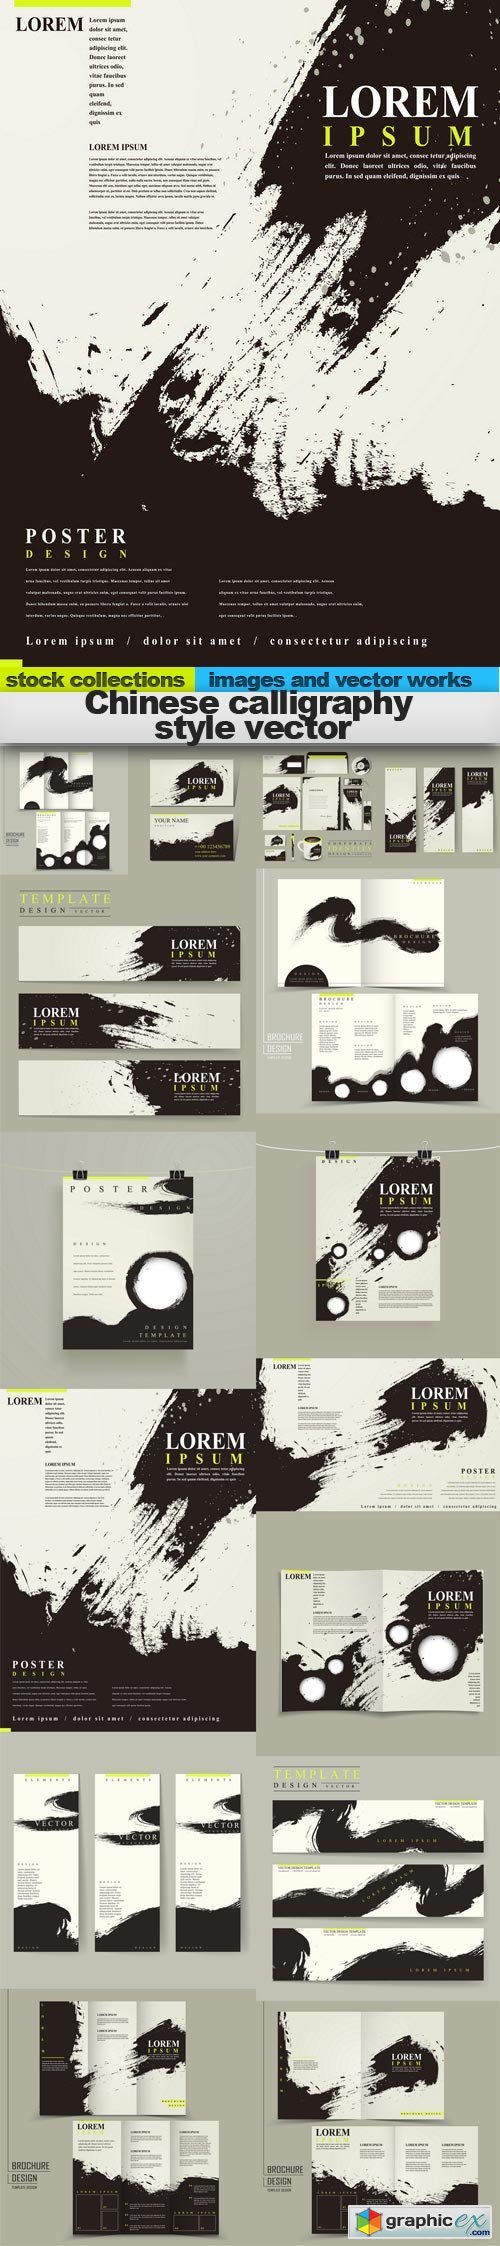 Chinese calligraphy style vector, 15 x EPS